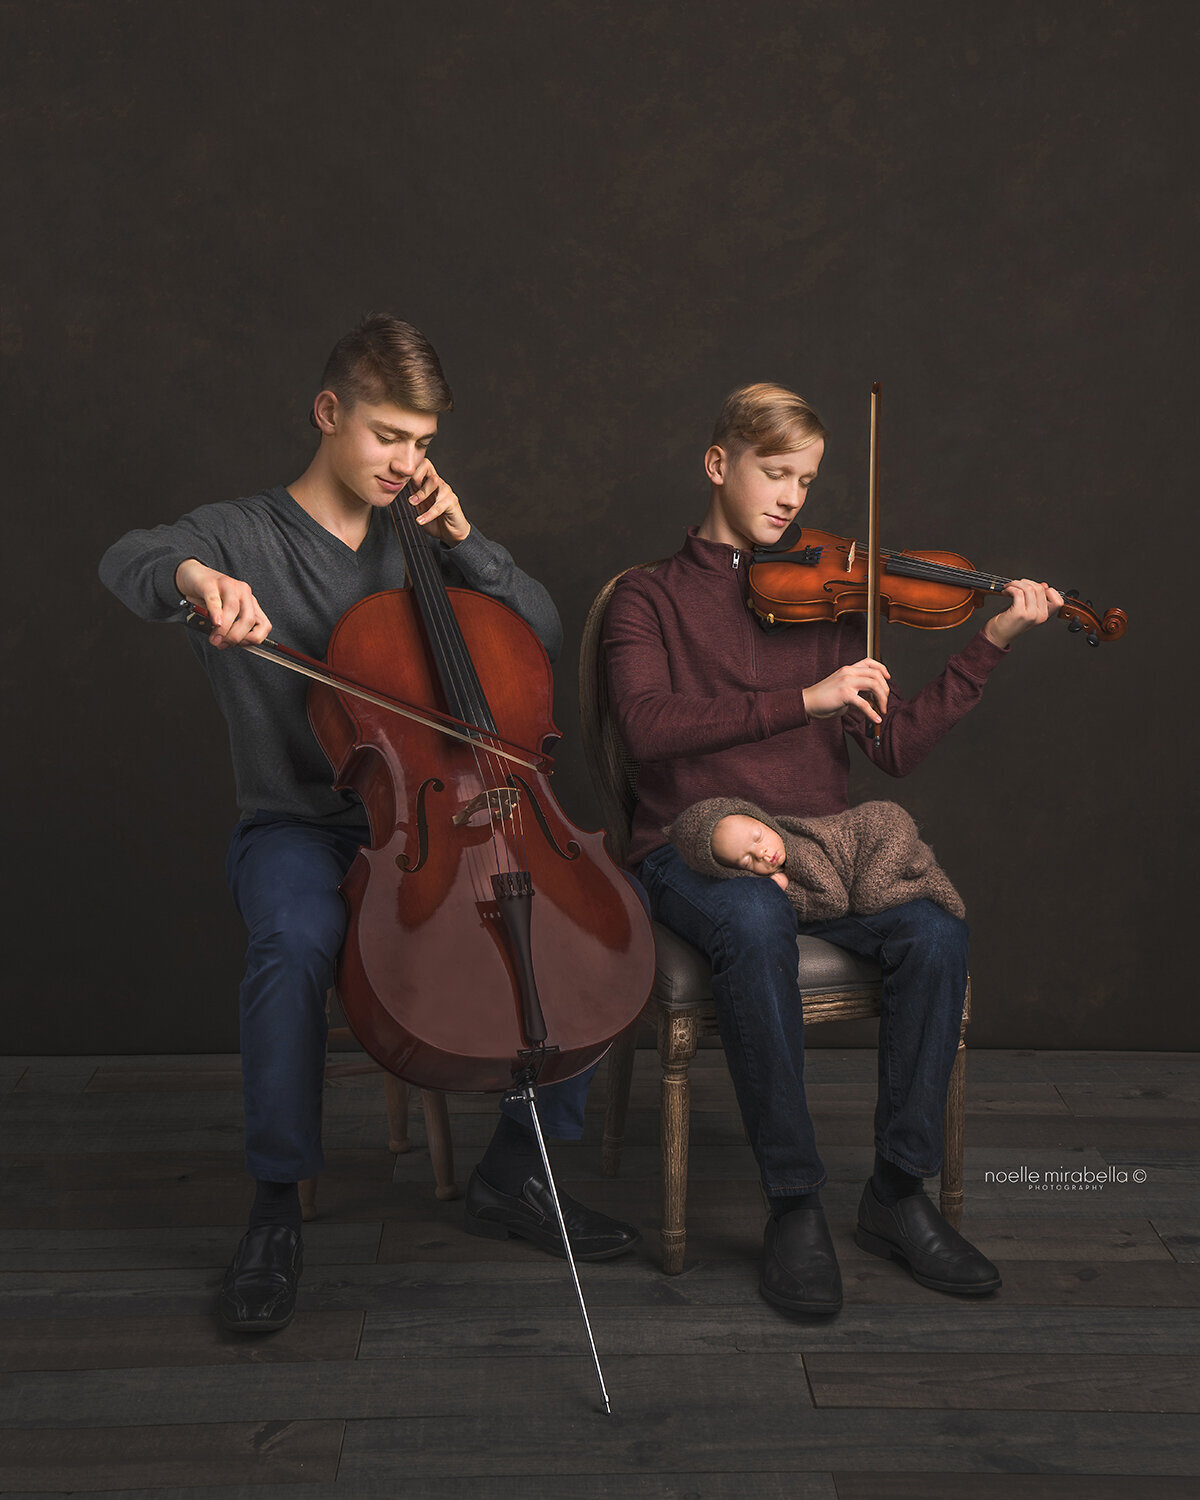 Teen boys playing the violen and cello with baby on their knee.